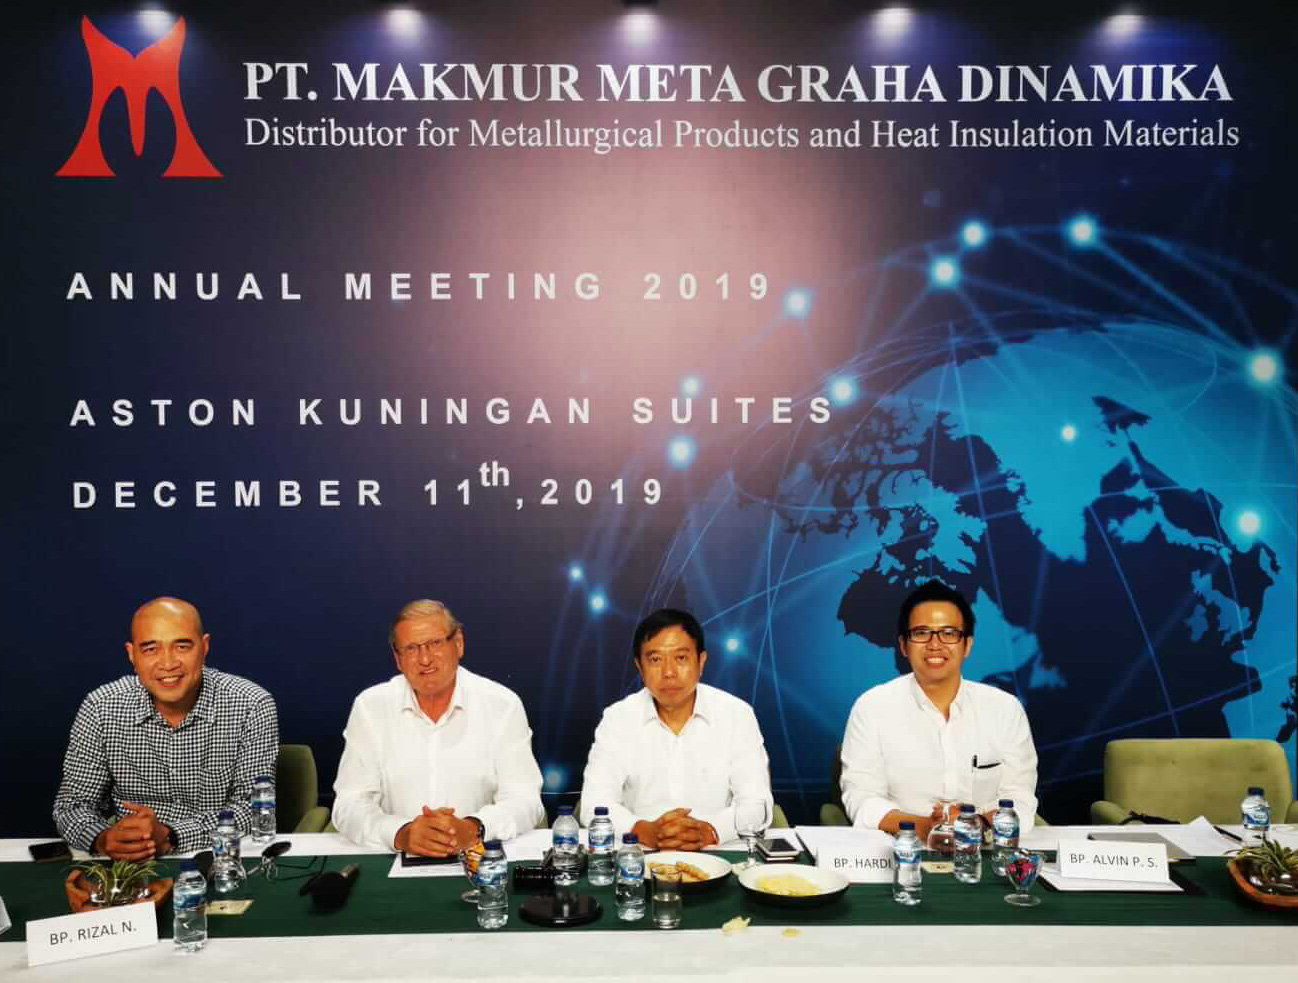 <h2>Attending the <strong><span style="color: rgb(196, 22, 28);">Makmurmeta annual meeting</span></strong> in Indonesia</h2>